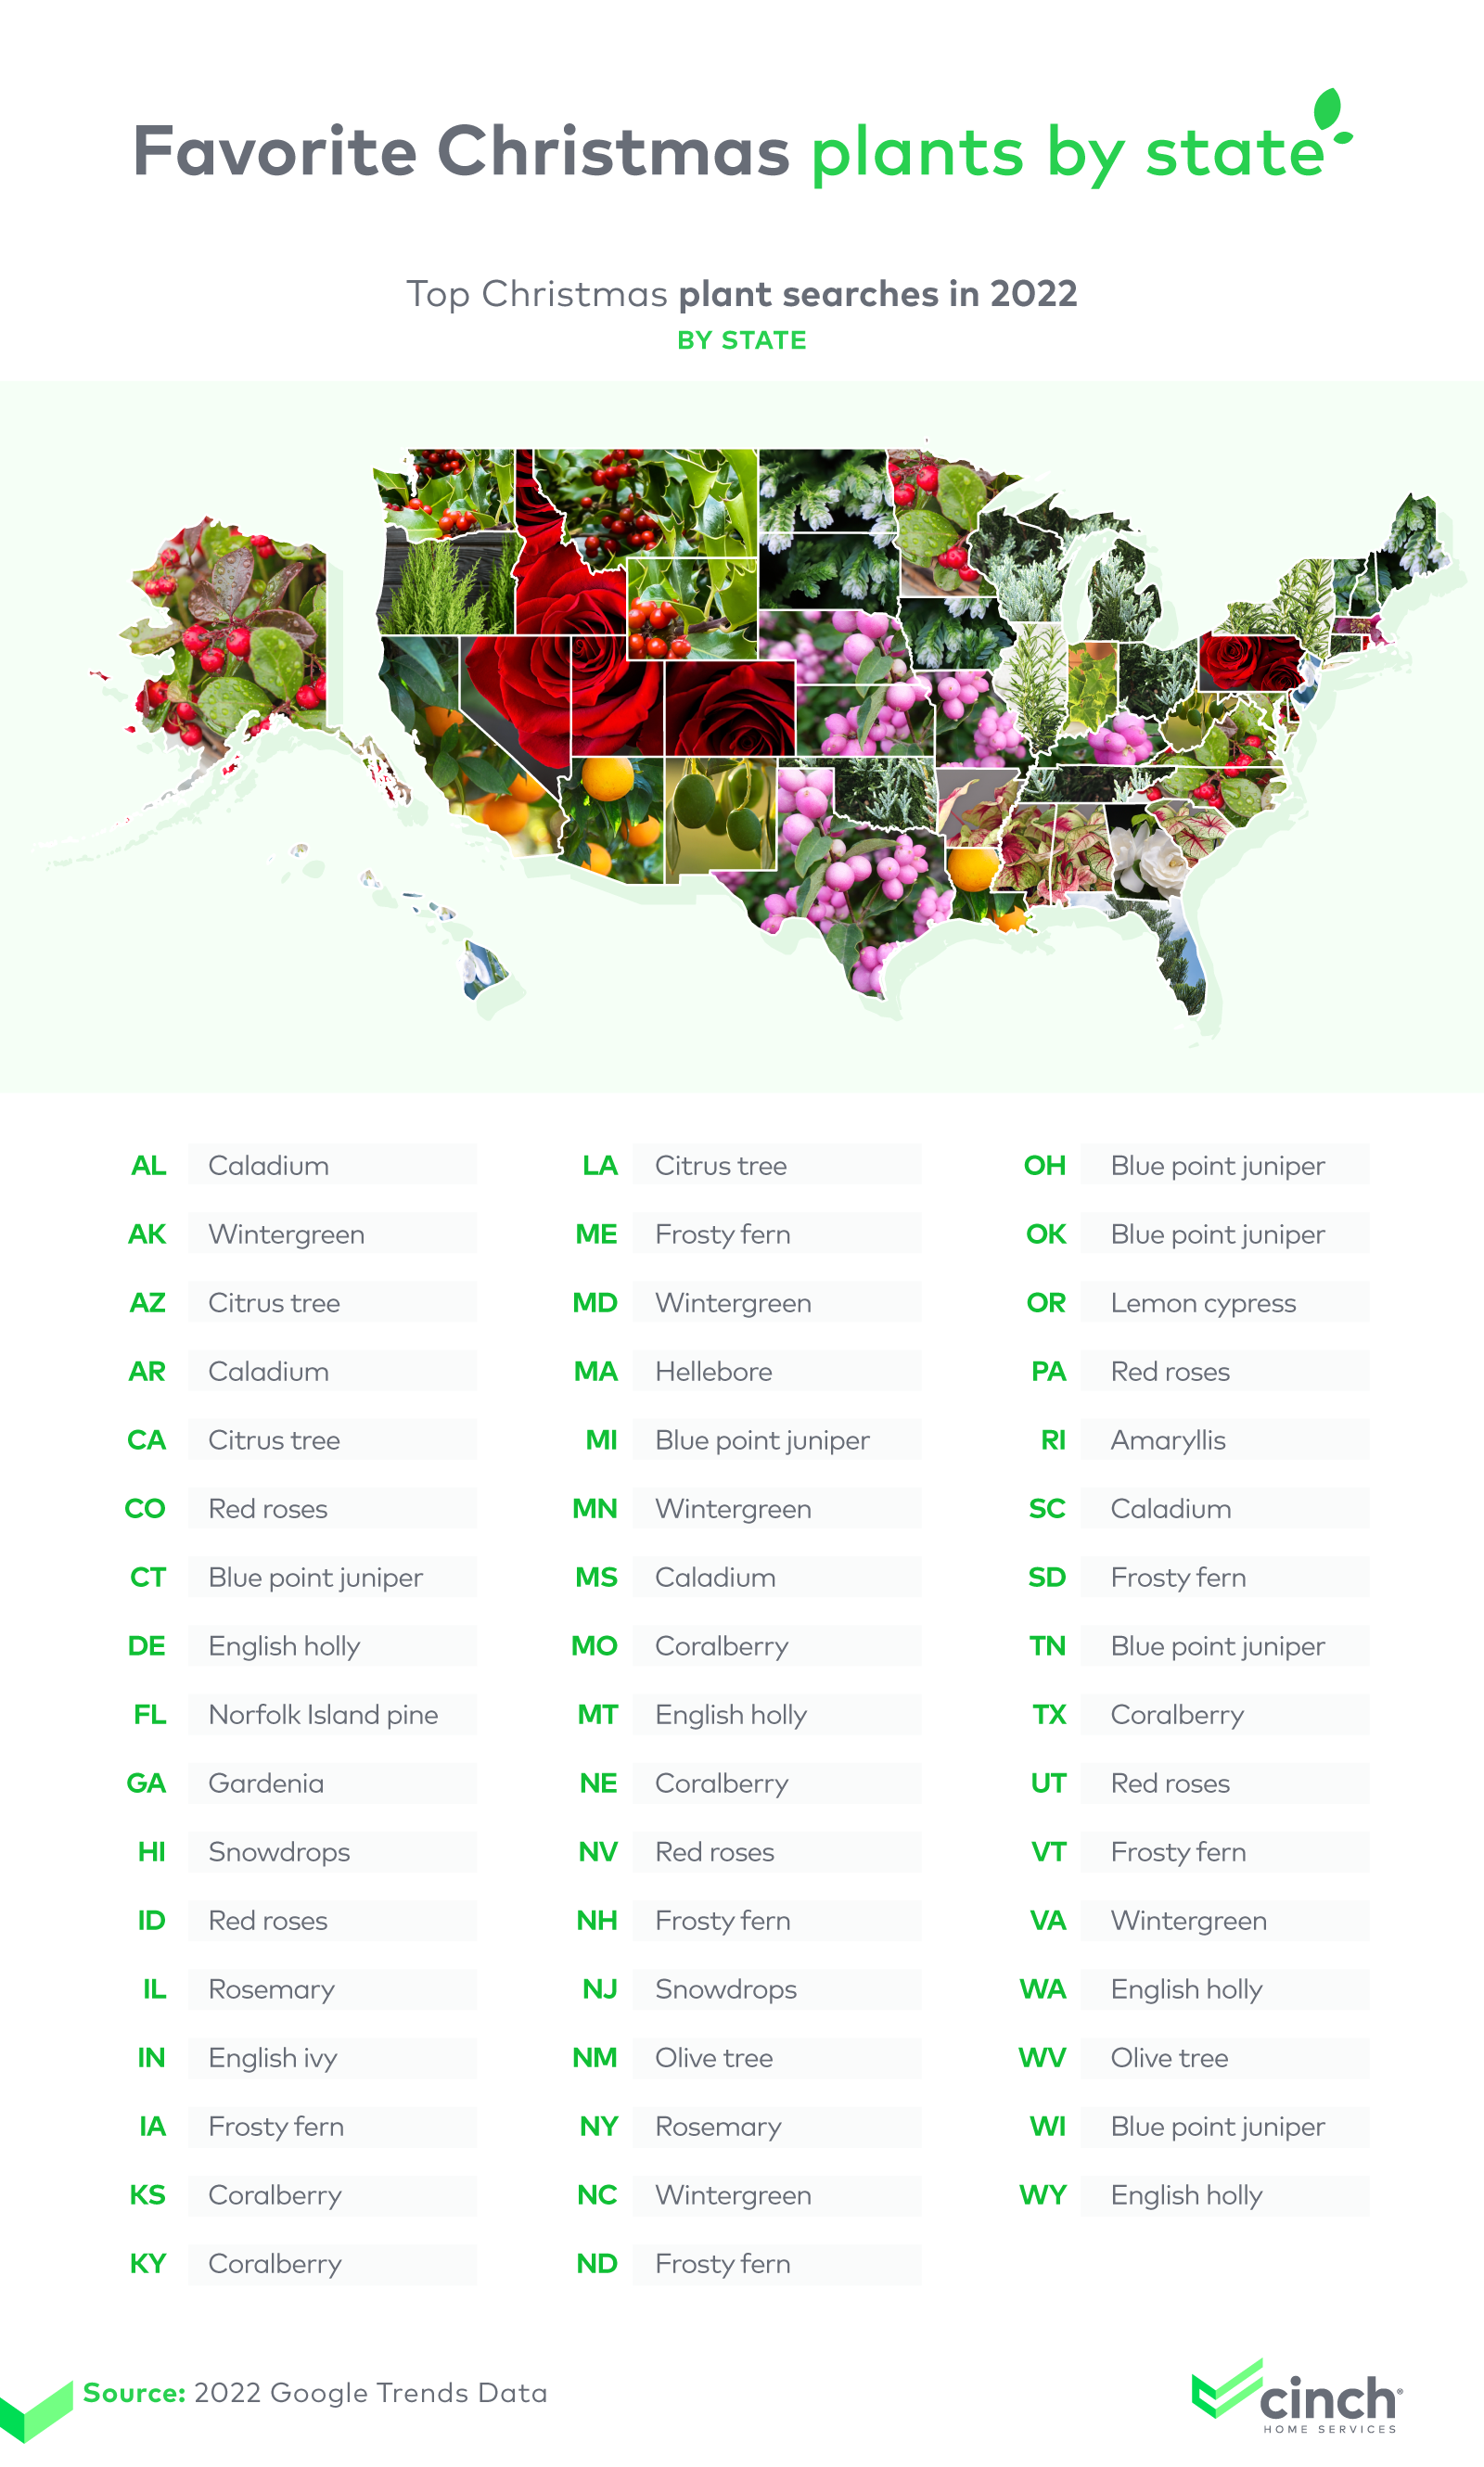 Favorite Christmas plants by state